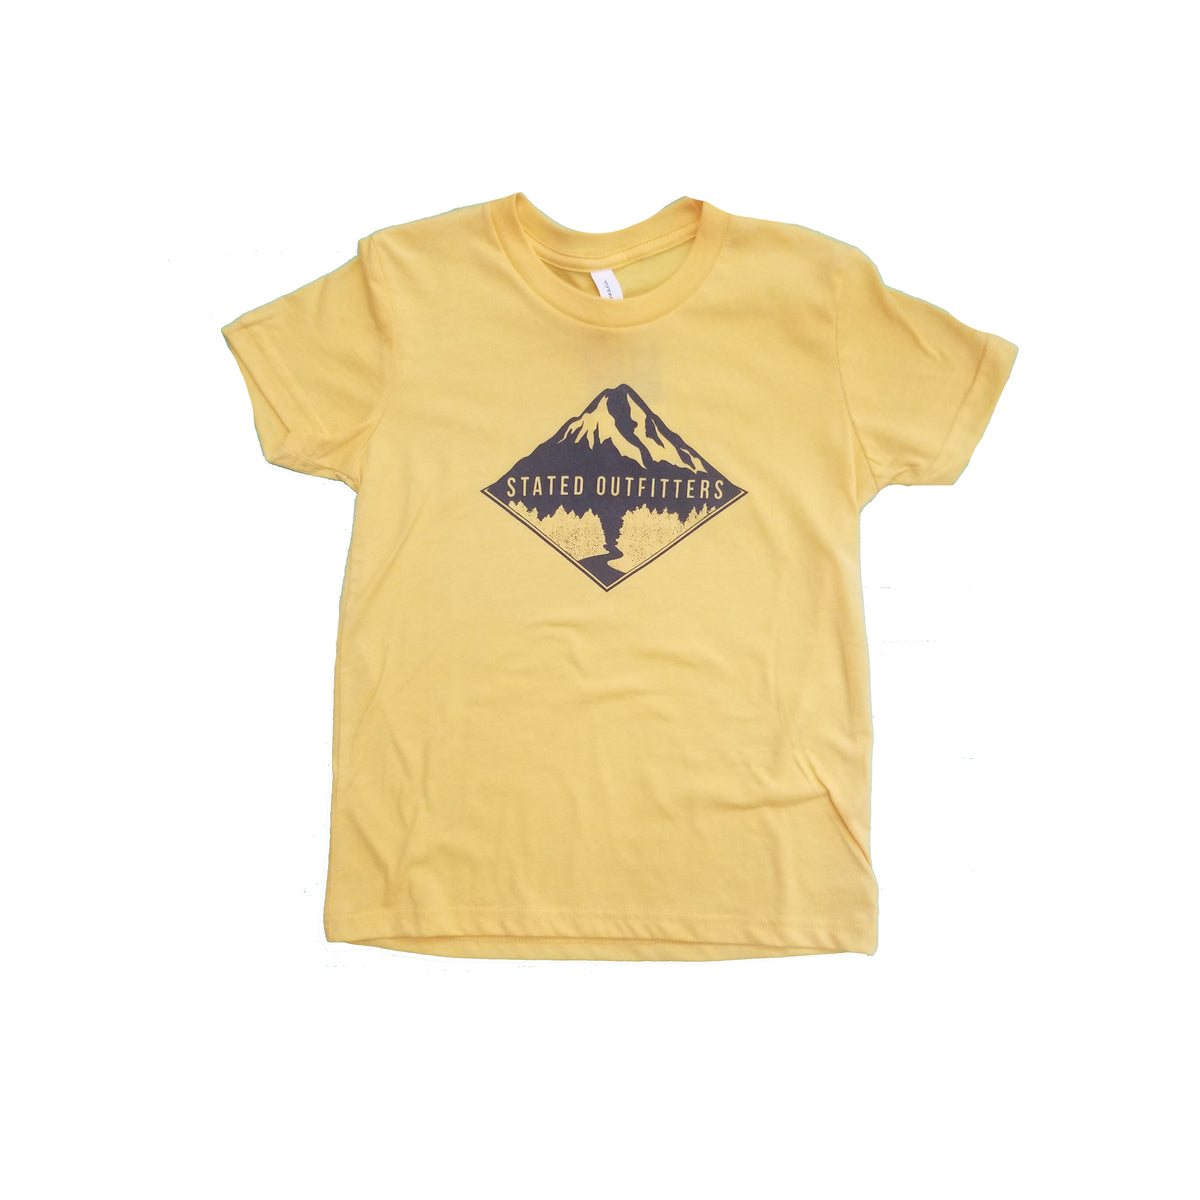 Stated Outfitters Youth Yellow/ Black Mountain Tee